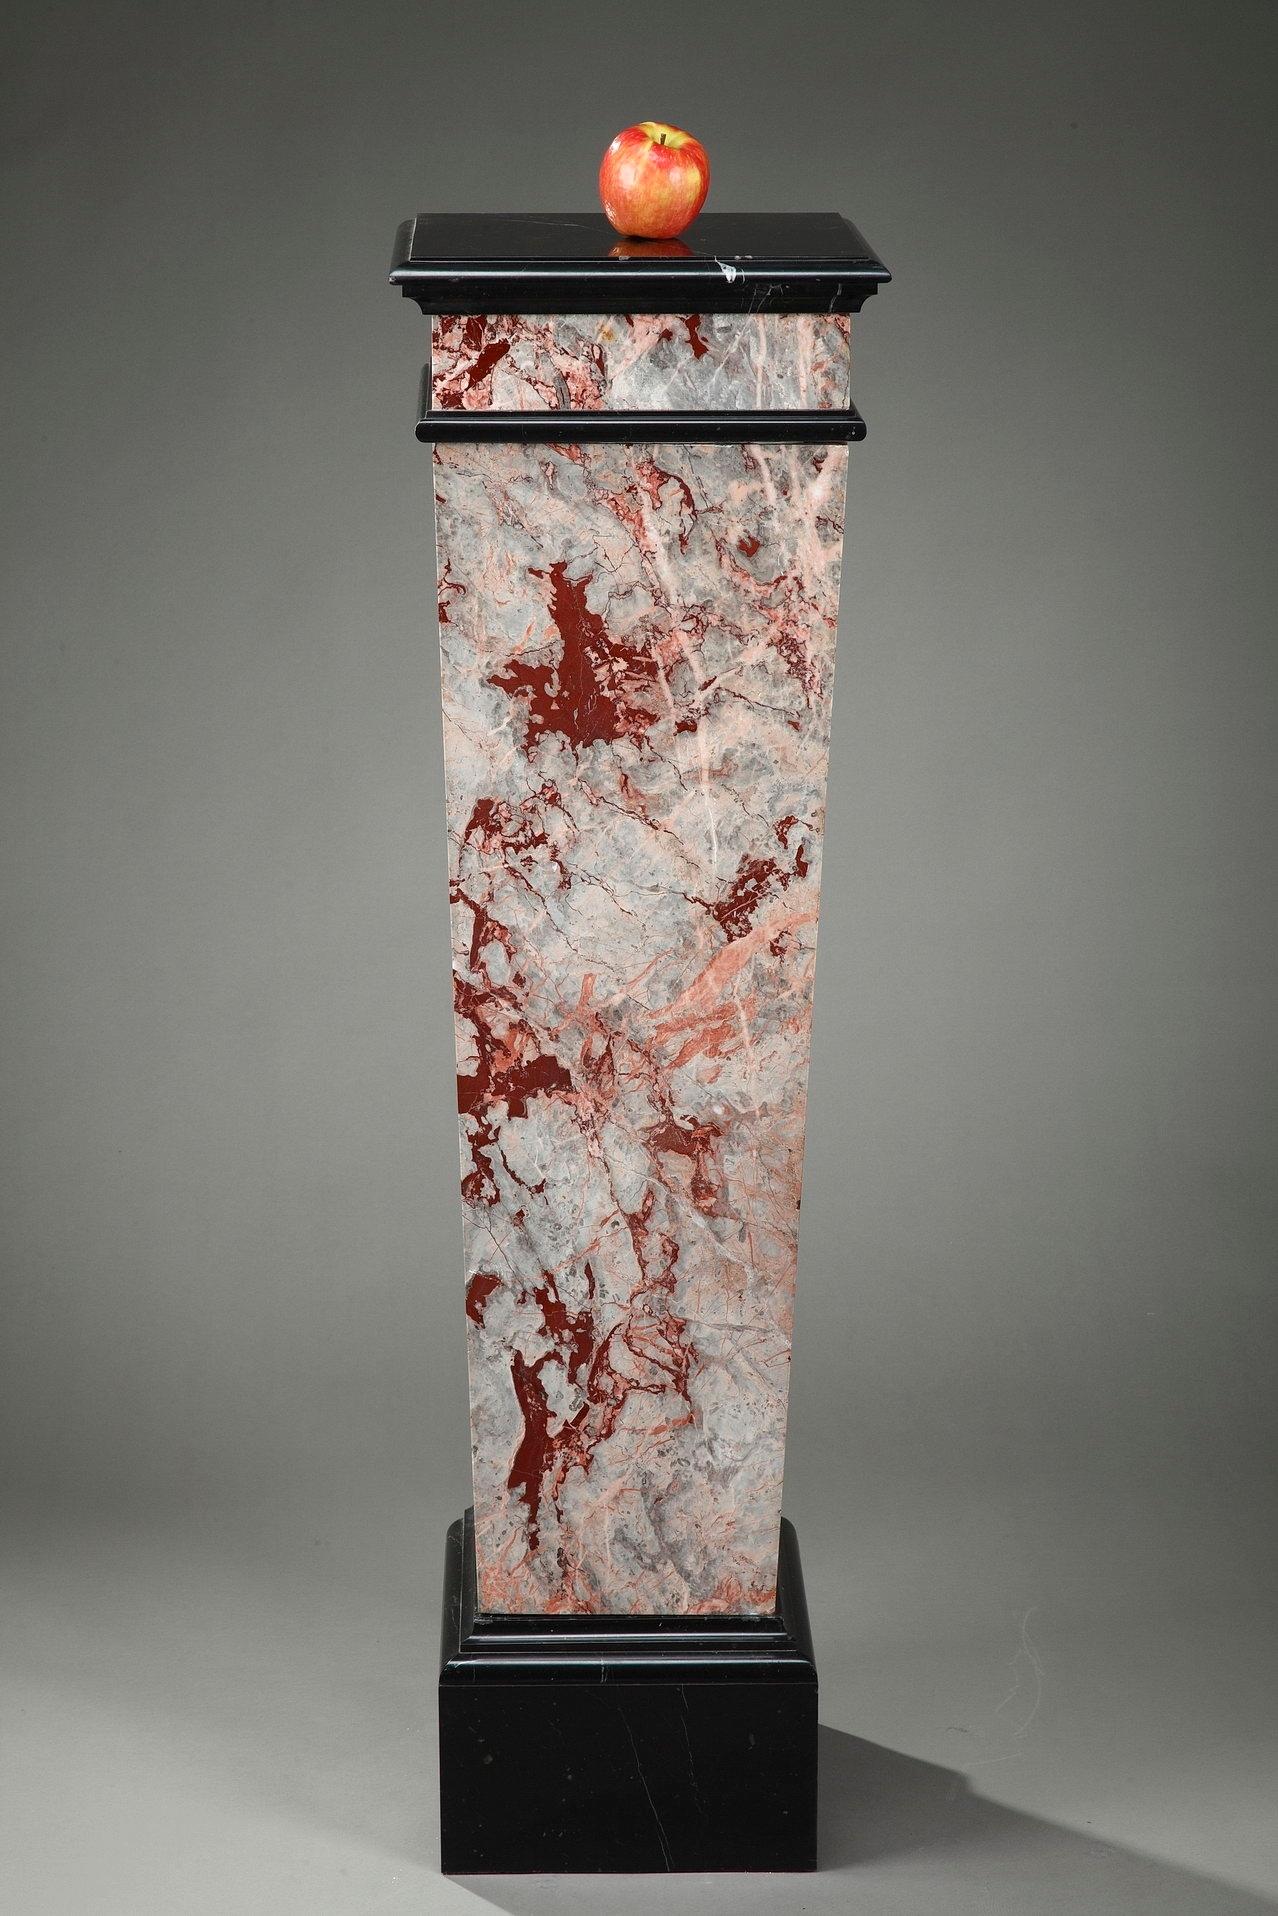 Monumental size red marble veneer pedestal crafted in the late 19th century. This decorative pedestal is complete with square black marble with white veins display plate and base,

circa 1900.
Dimensions: W 13.8 in, D 13.8in, H